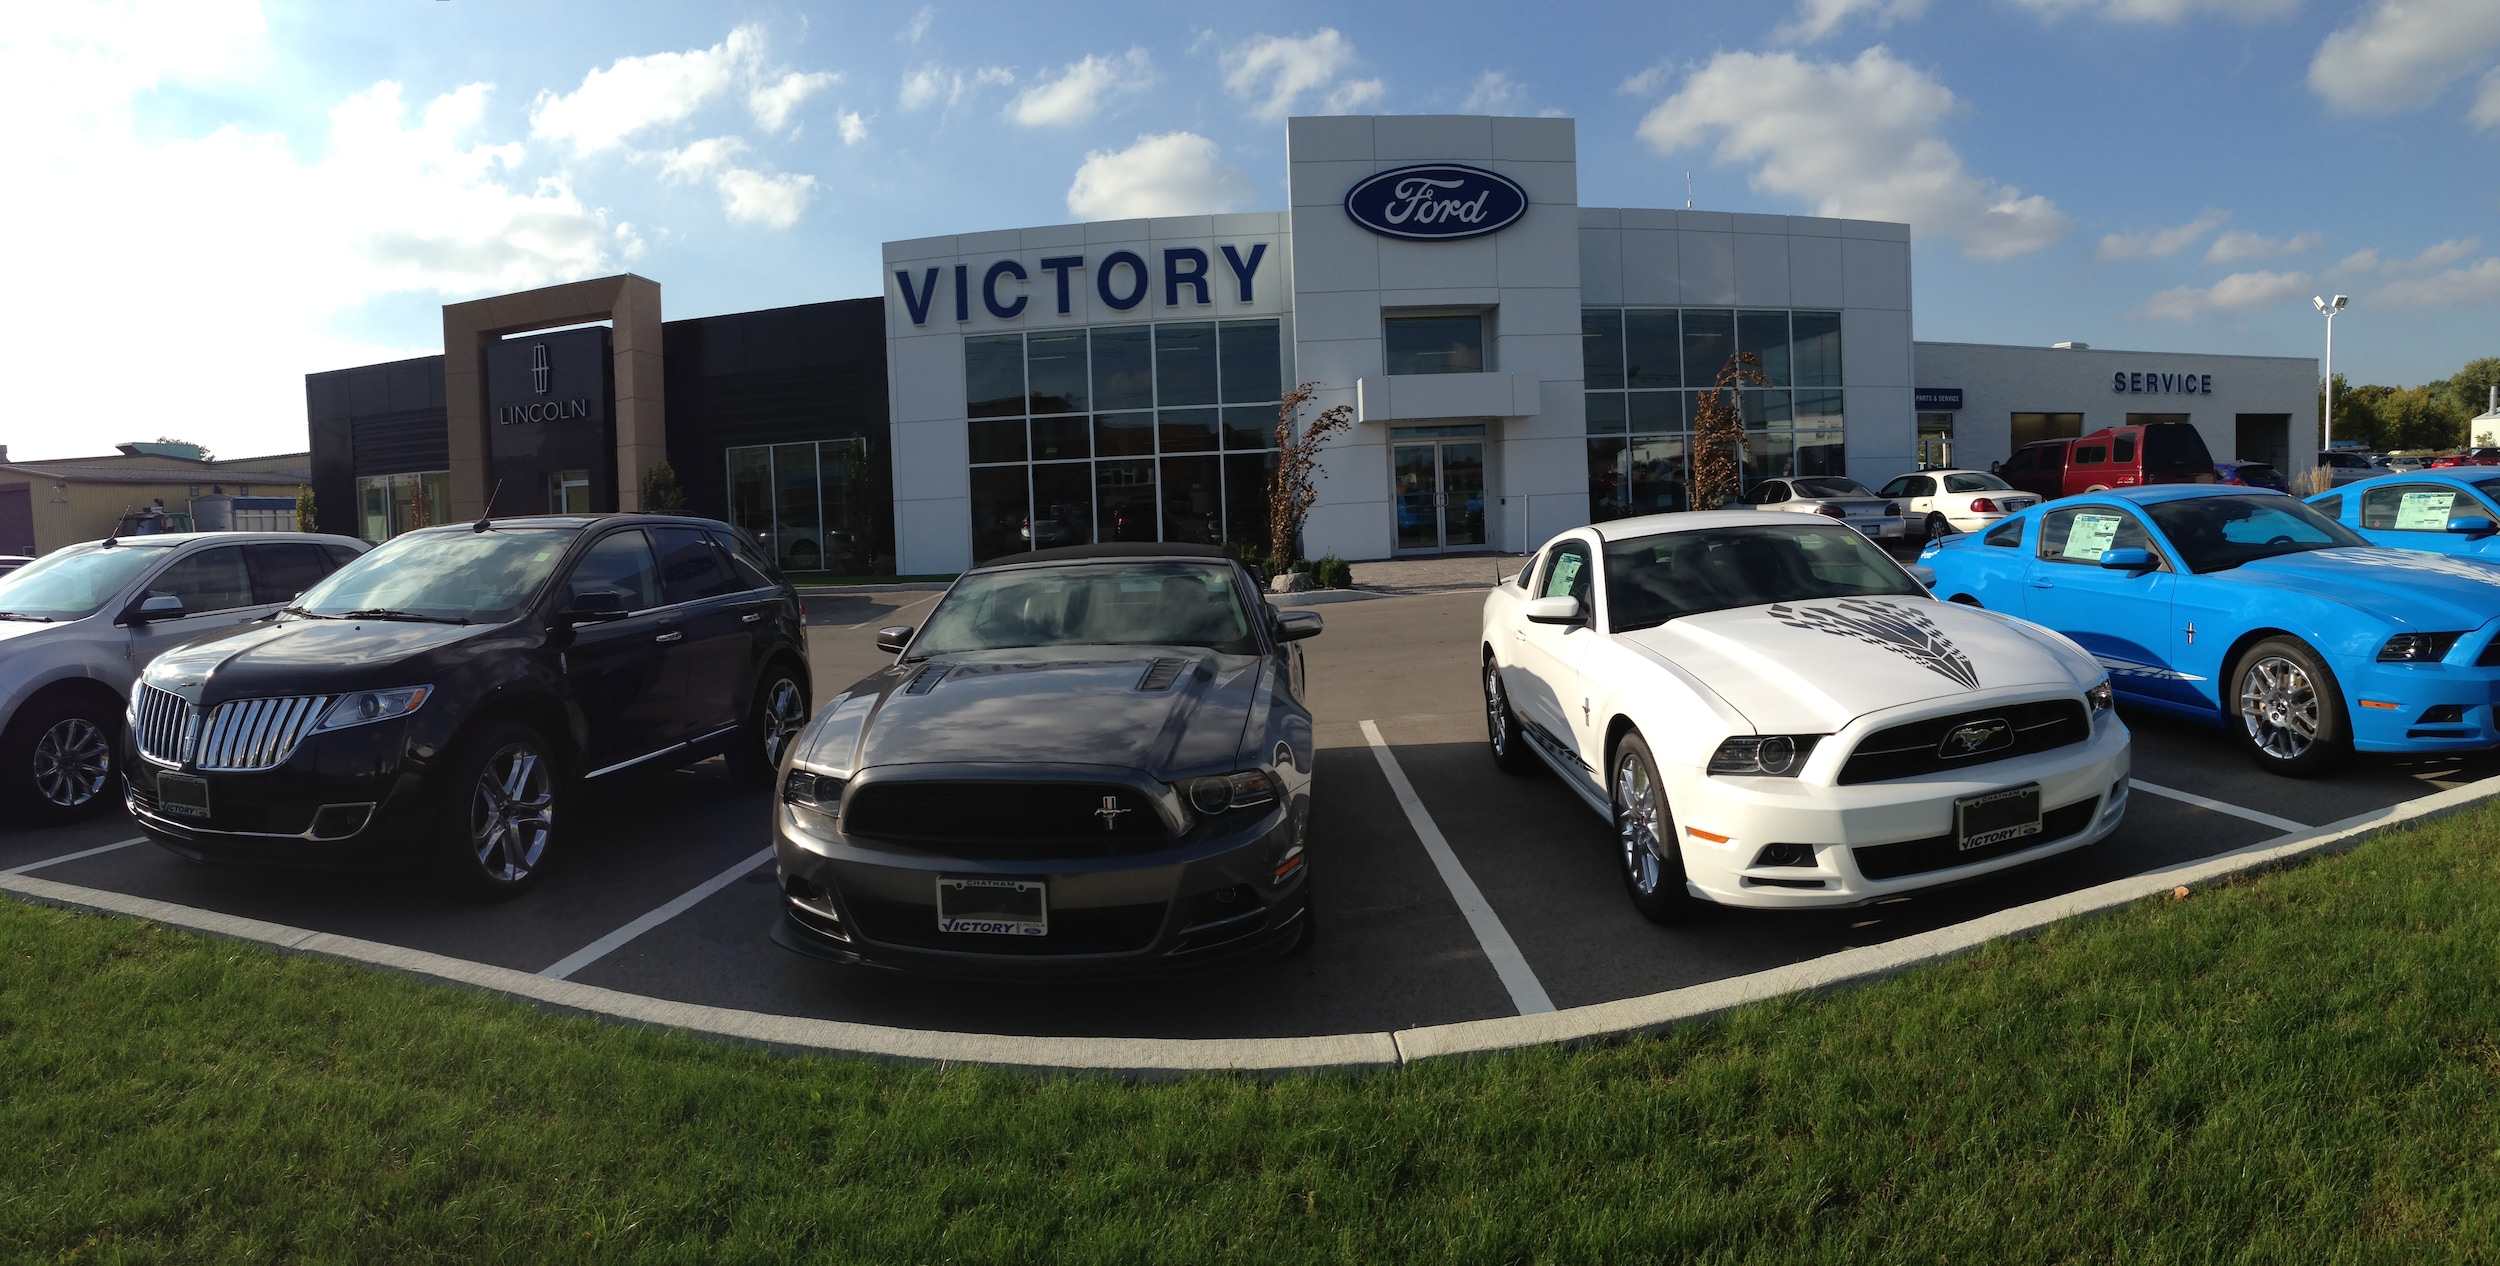 Victory ford sales chatham #7